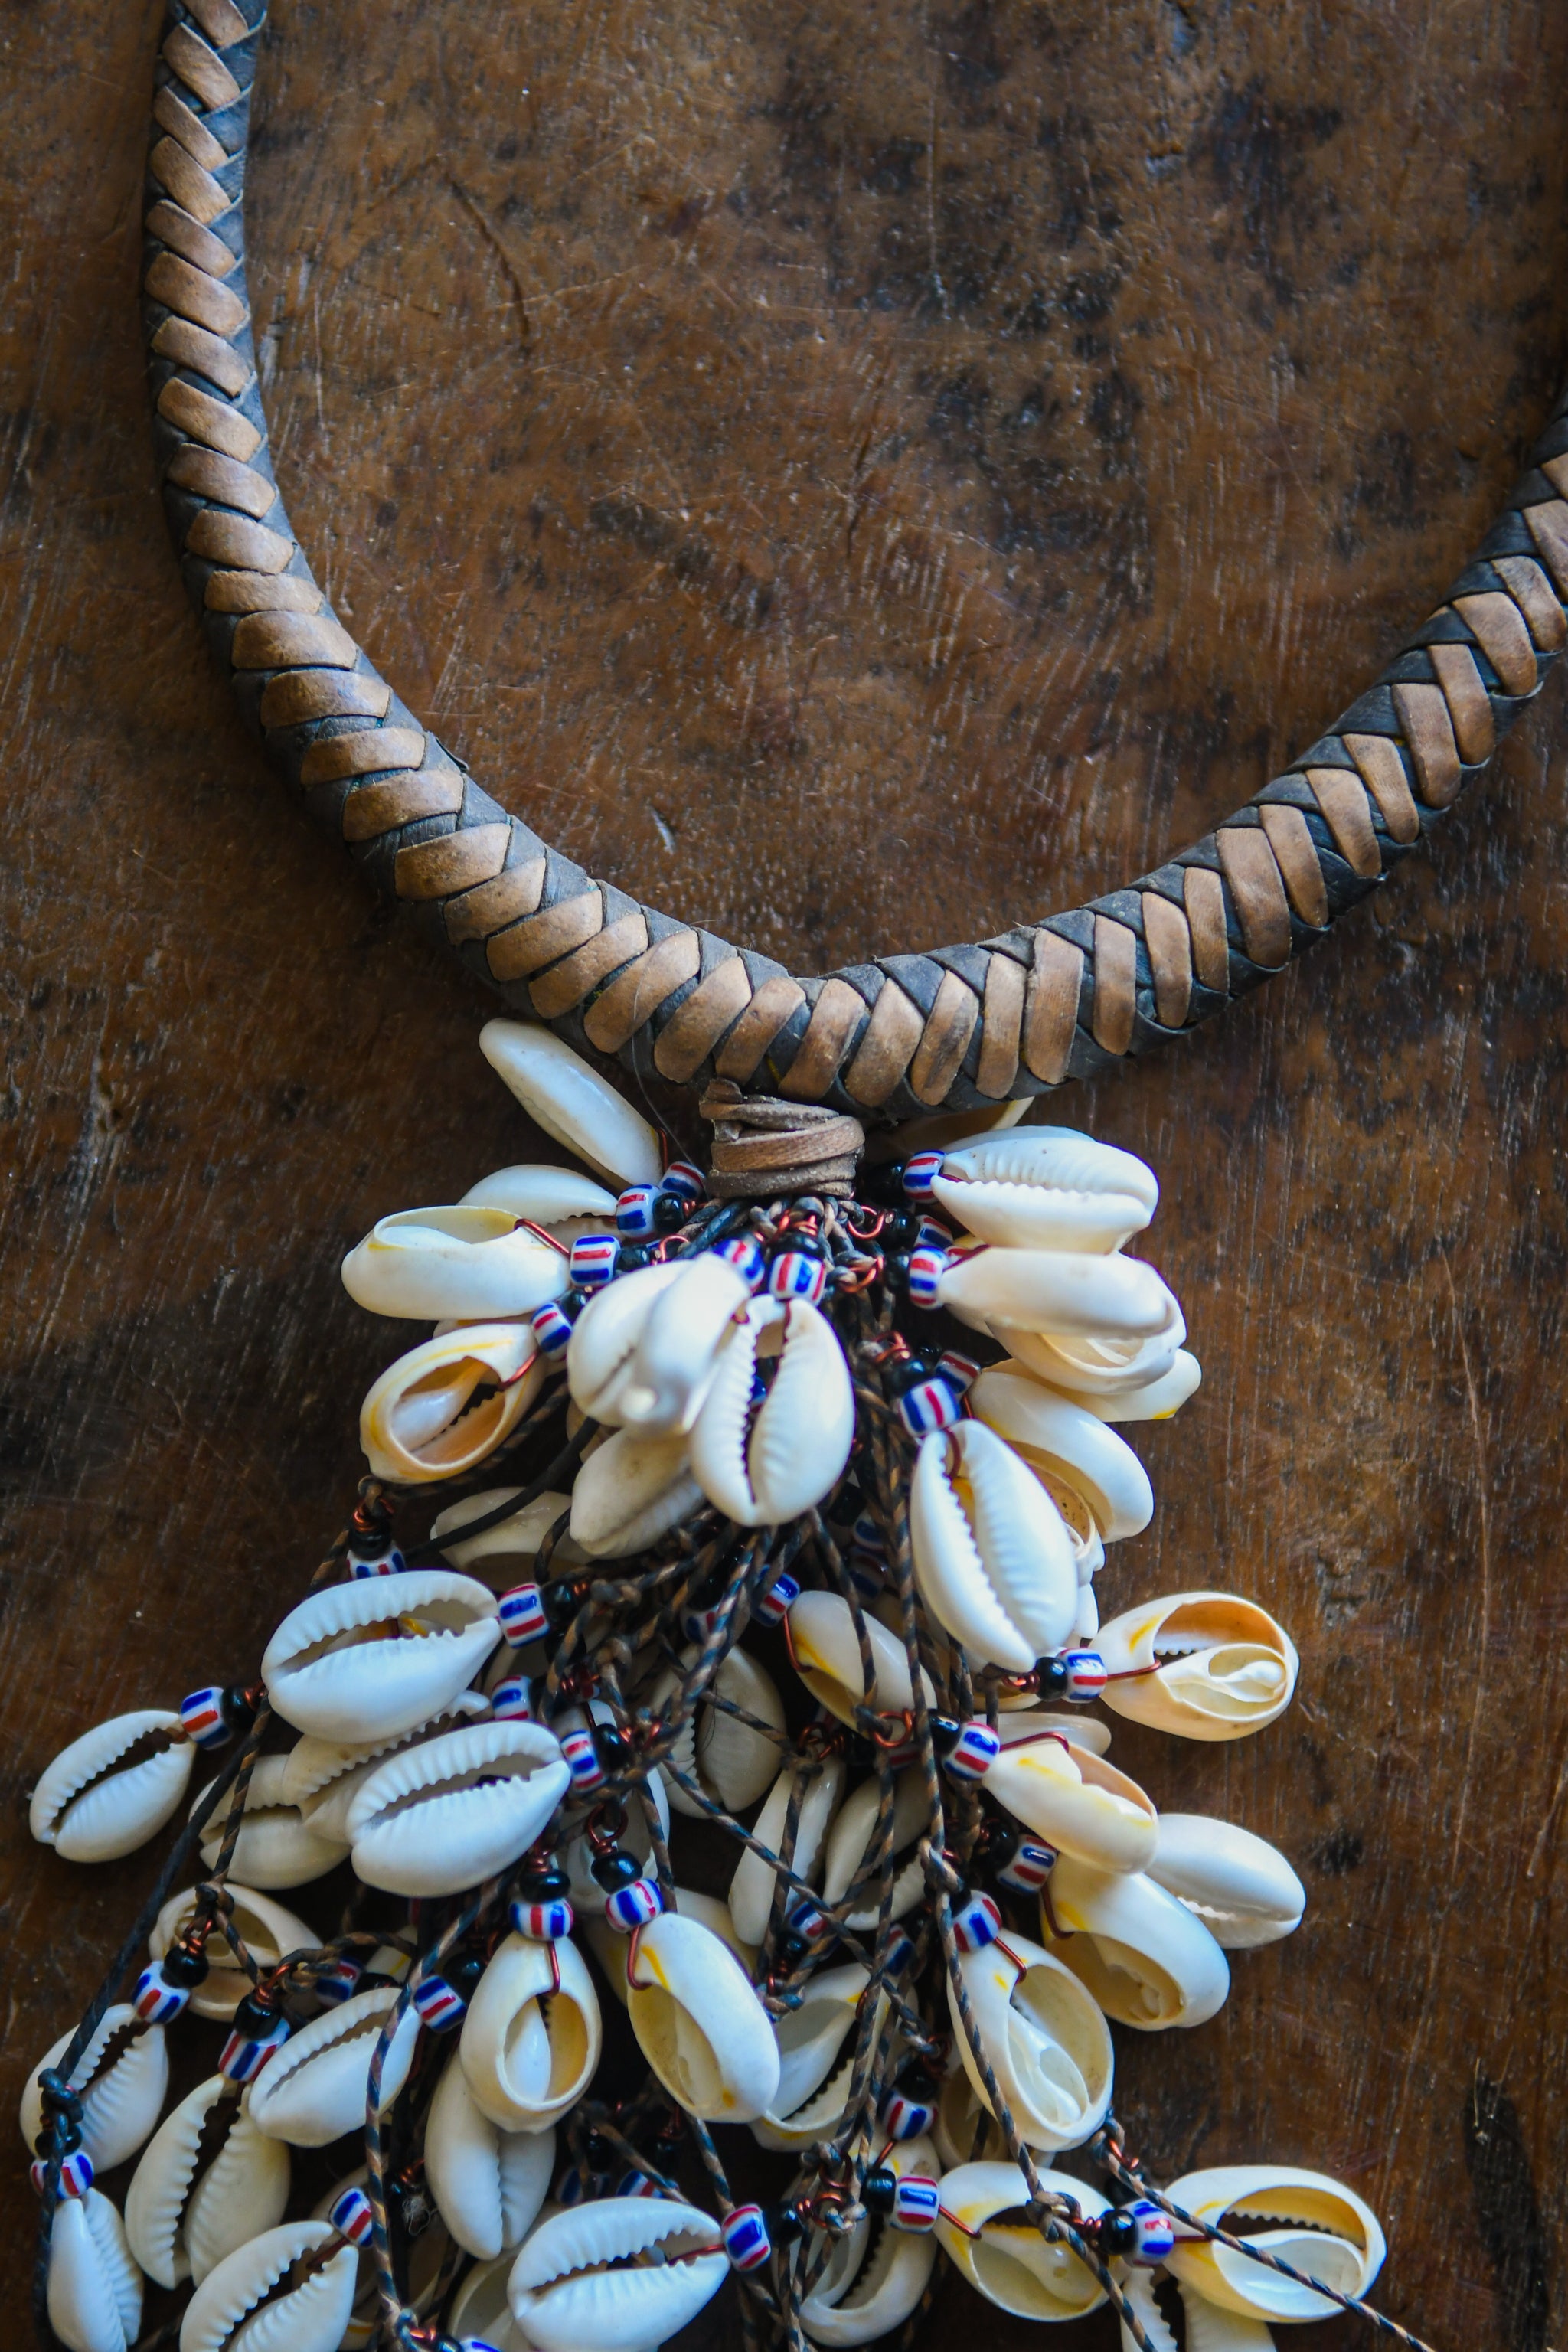 Tribal Necklaces - Traditional - Folk Art - African - Objects - Artifacts - Collectible - Cowrie Shell Necklace Pendant - Unique Timeless Piece - Crafted Old Tribal Cowrie Shell Pendant - Leather Necklace - Venetian Chevron Trade Beads - Handcrafted Tribal Culture - Style